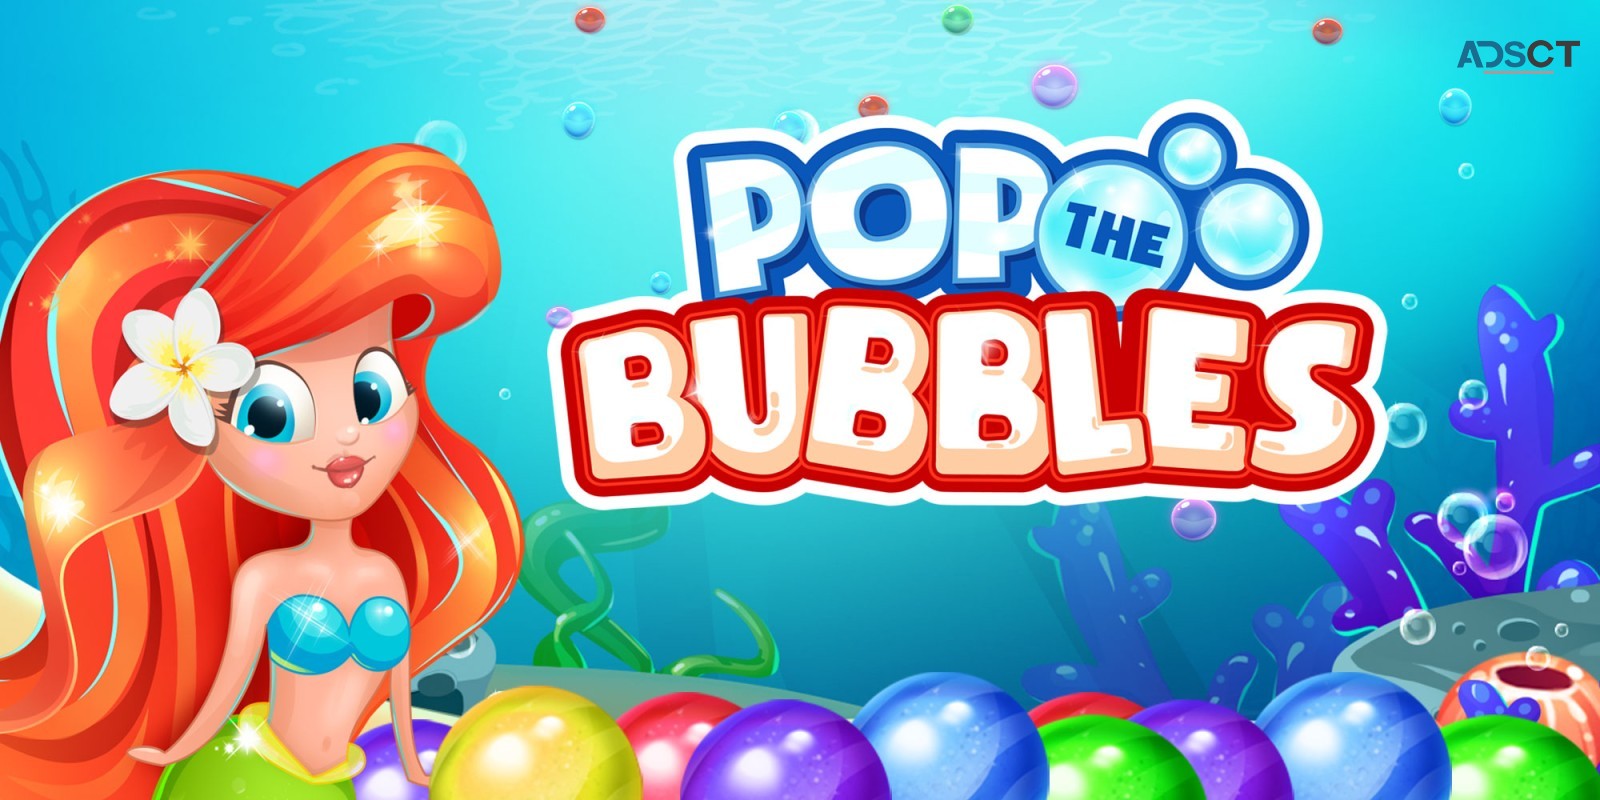 Install and Play Pop the Bubbles!